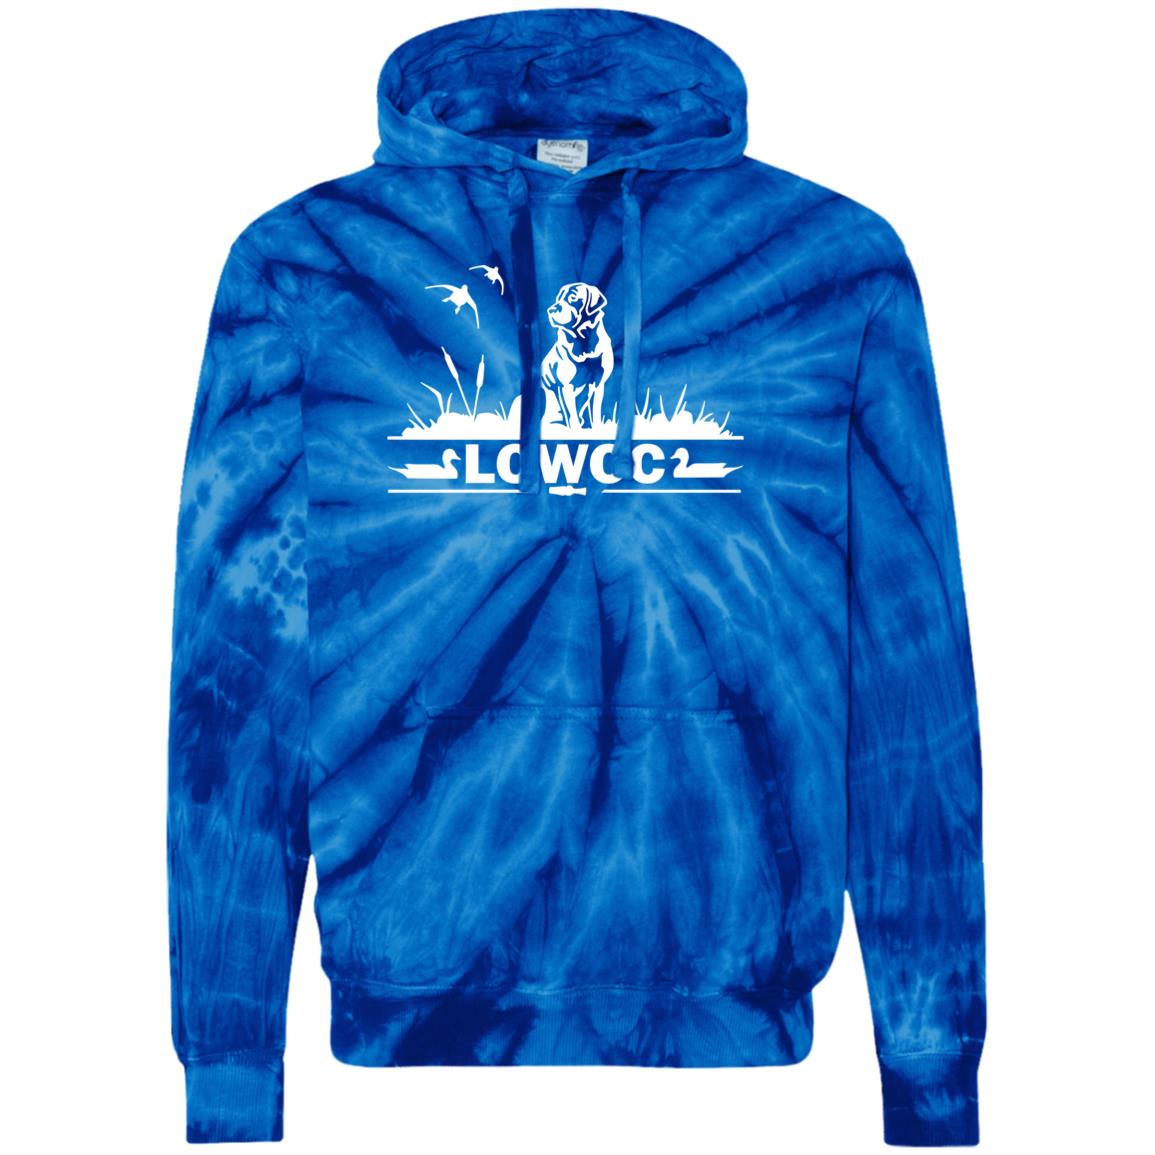 LCWCC Dog - White CD877 Unisex Tie-Dyed Pullover Hoodie